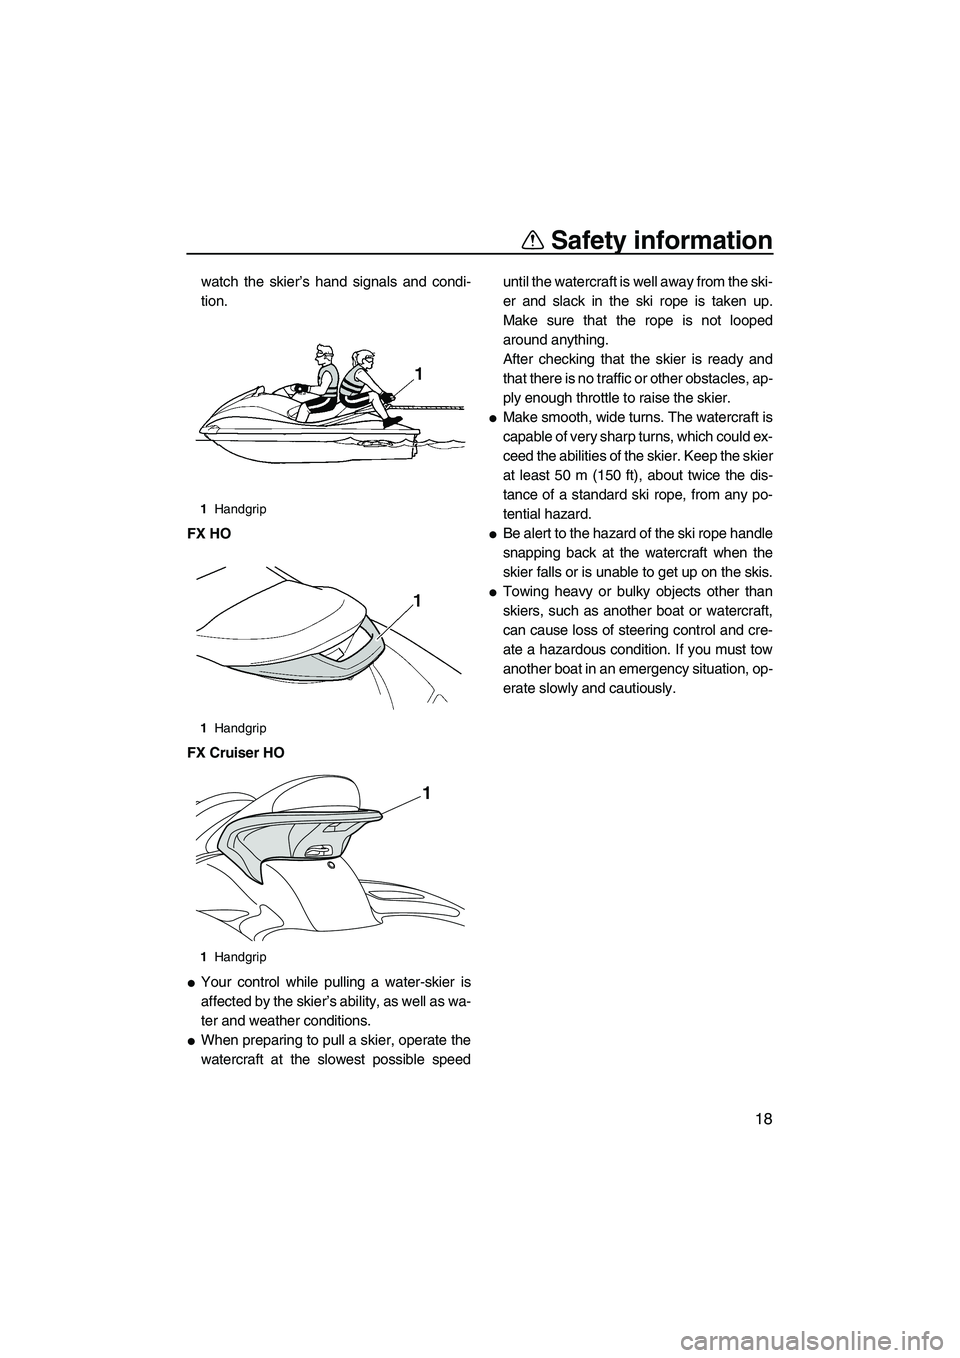 YAMAHA FX HO 2010  Owners Manual Safety information
18
watch the skier’s hand signals and condi-
tion.
FX HO
FX Cruiser HO
Your control while pulling a water-skier is
affected by the skier’s ability, as well as wa-
ter and weath